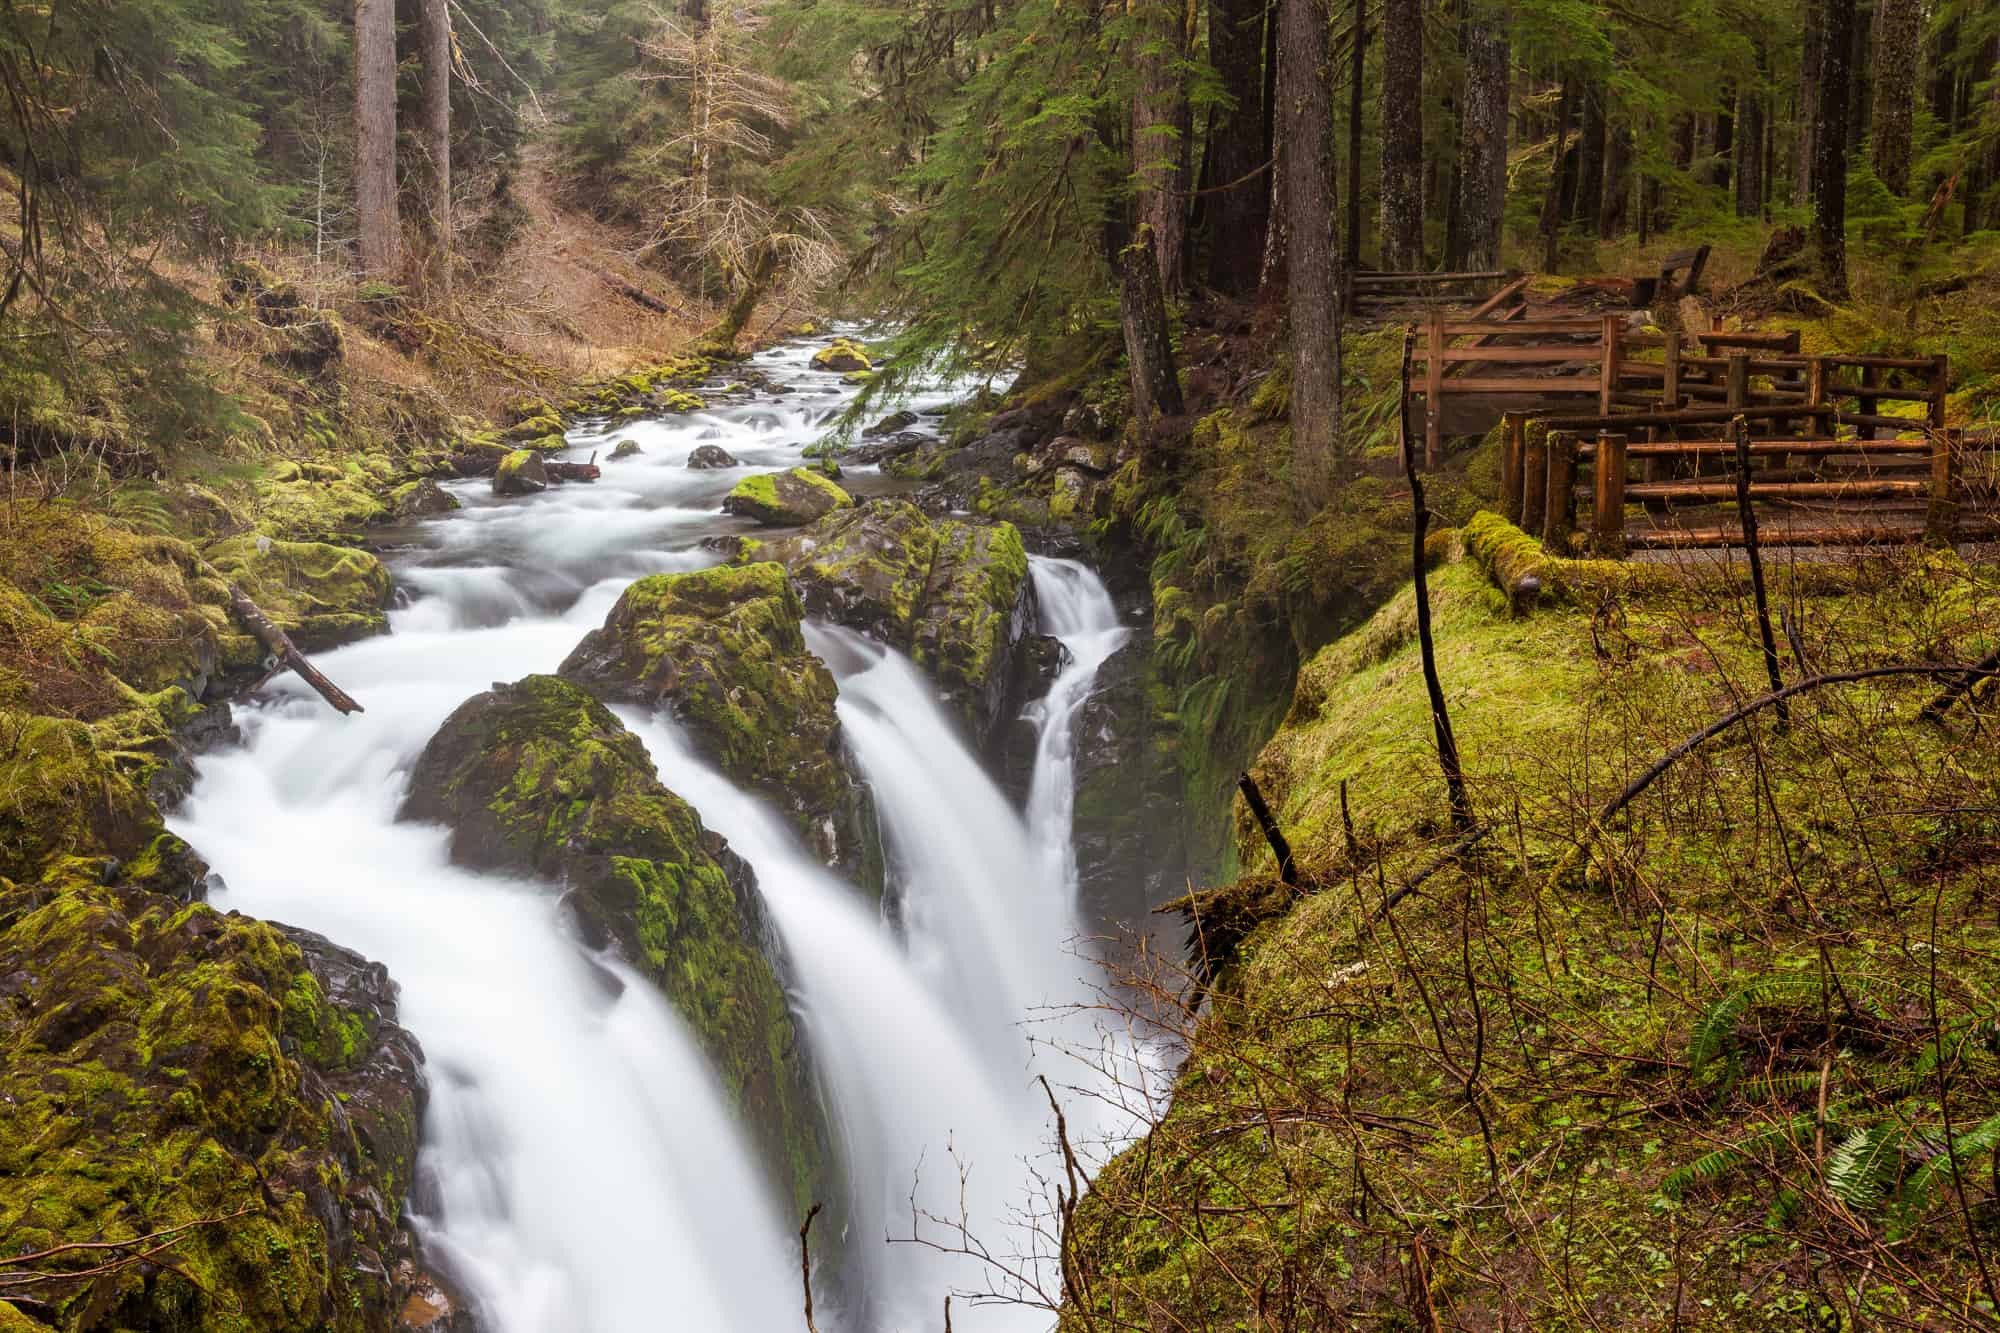 Sol Duc Falls seen with 4 waterfalls falling down the rocky cliff edge next to a viewing playform